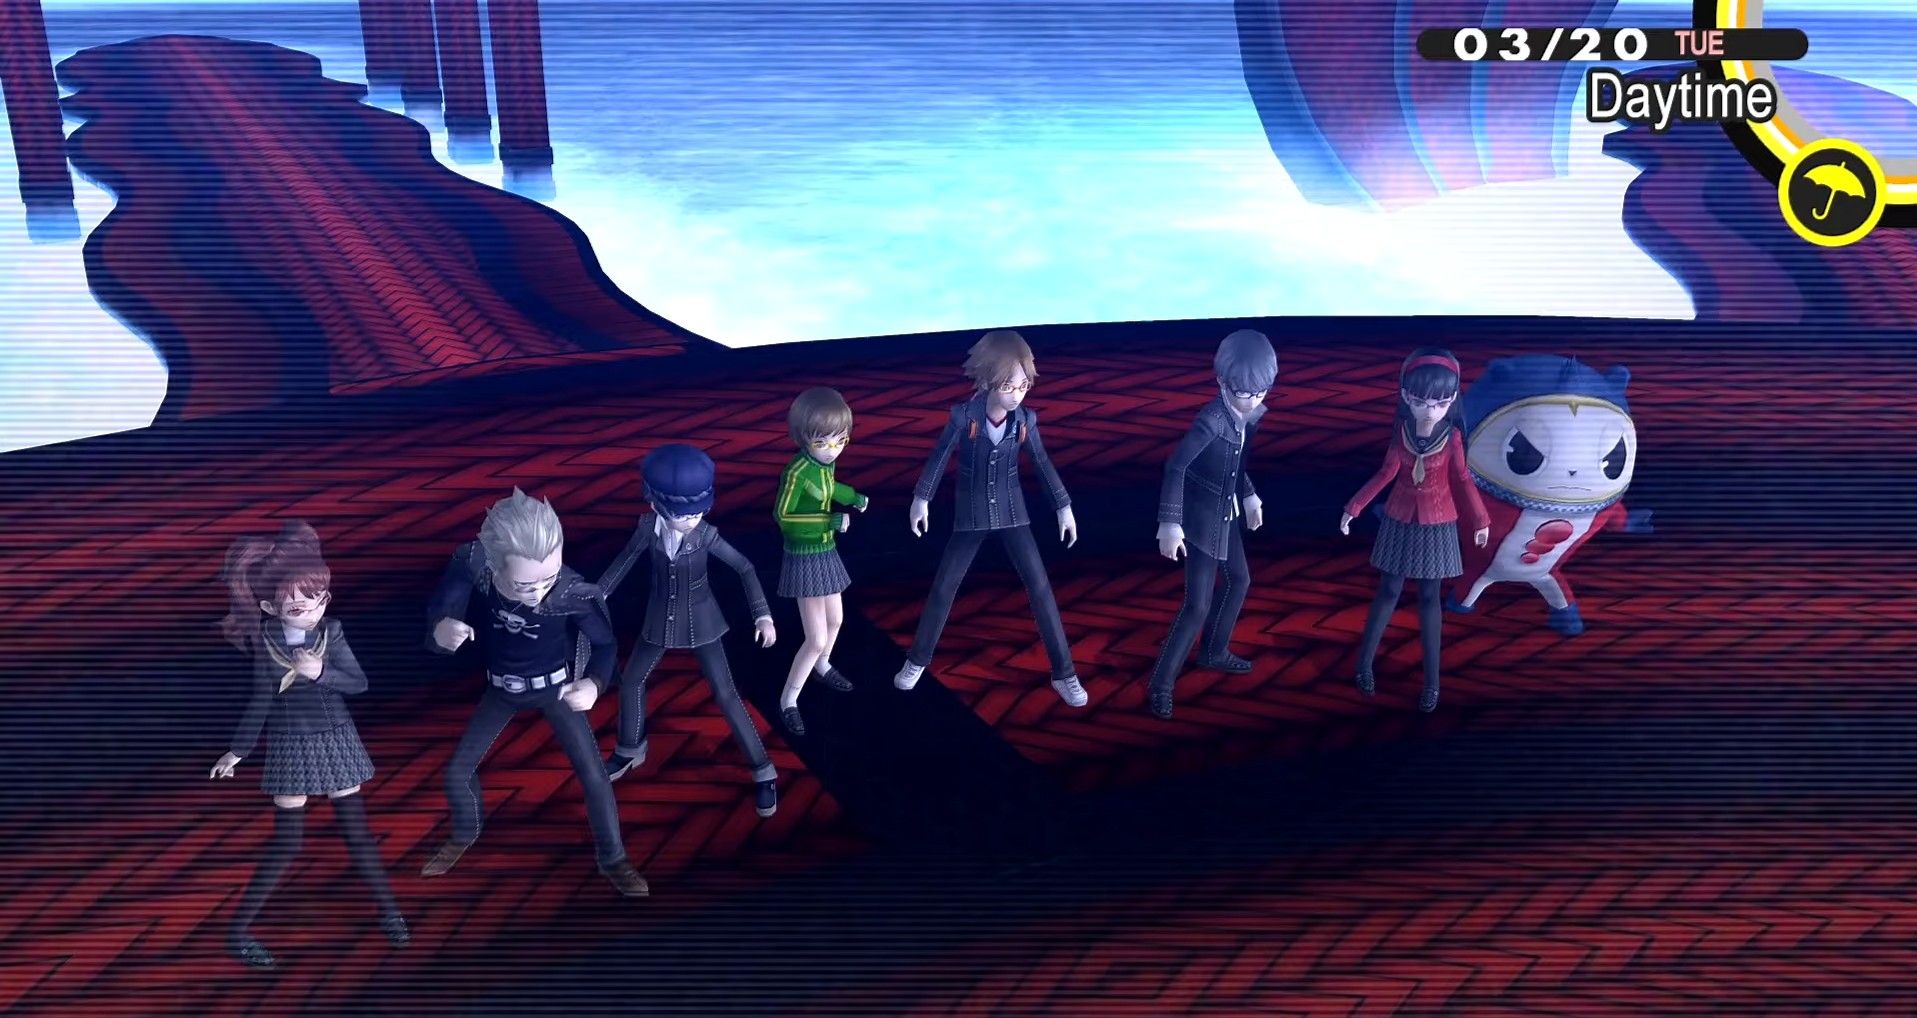 the investigation team in battle poses just before taking on izanami and izanami-no-okami for the final fight of persona 4 golden